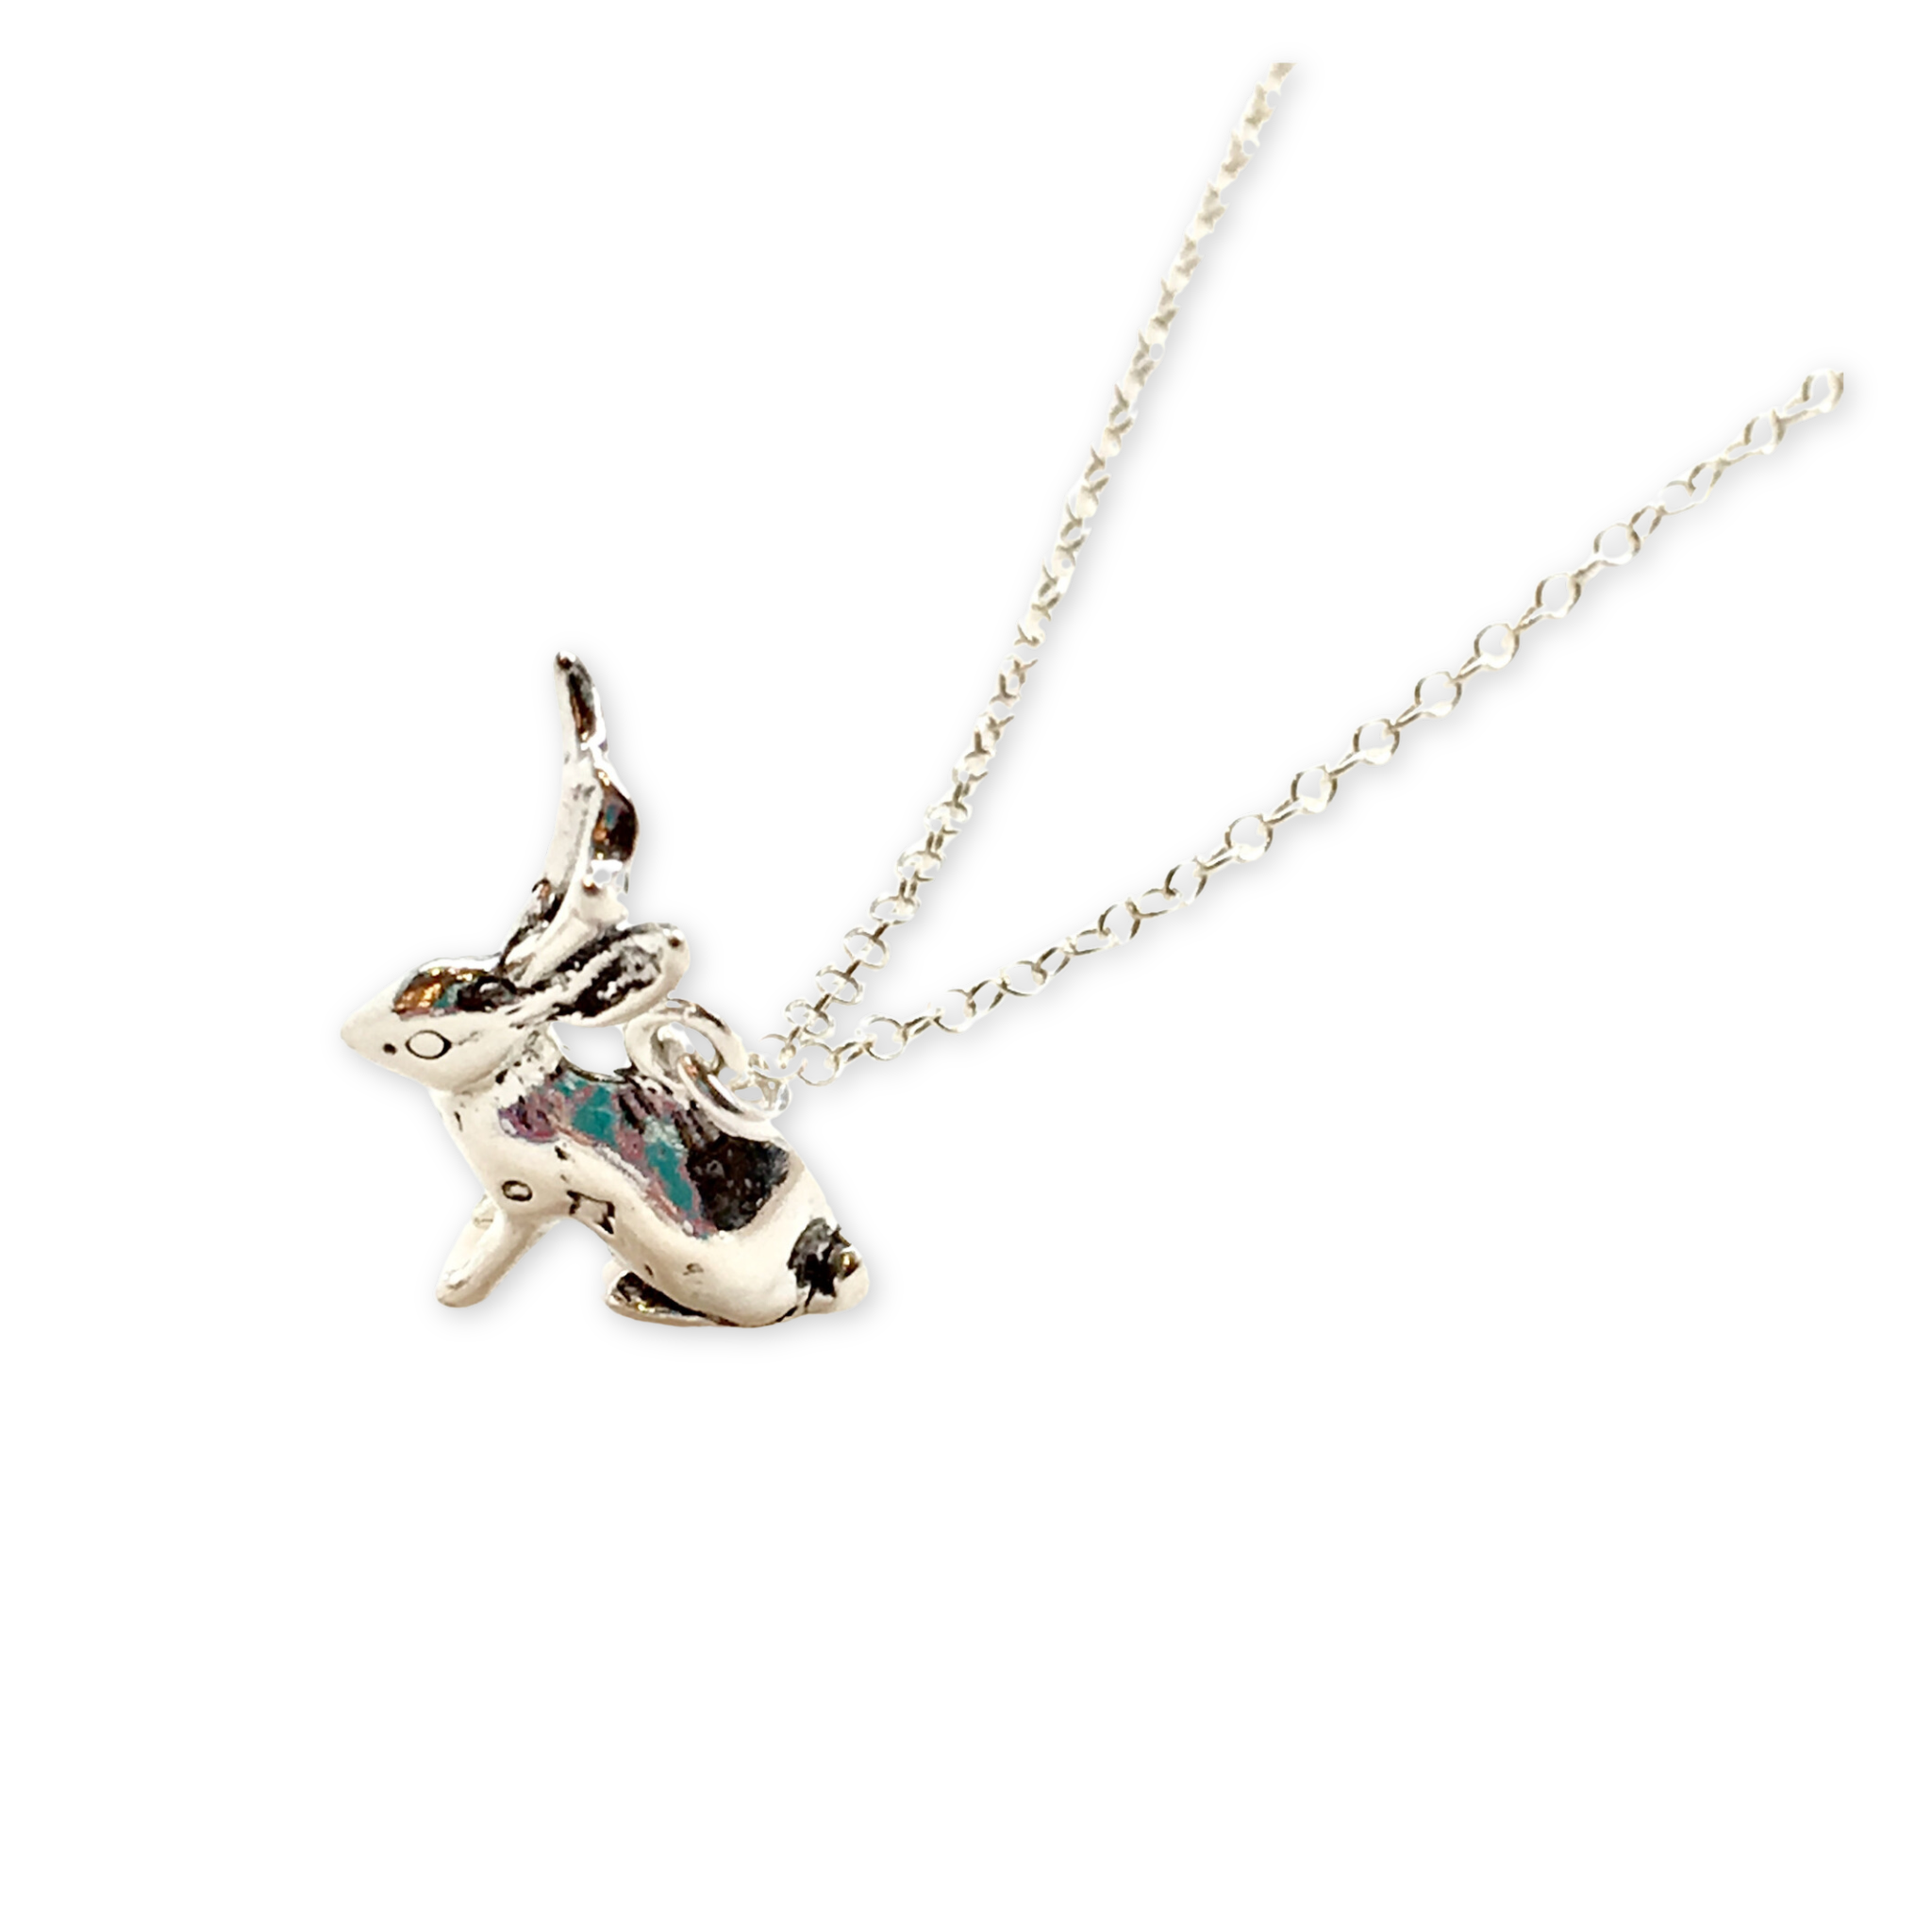 silver necklace with a jackalope pendant